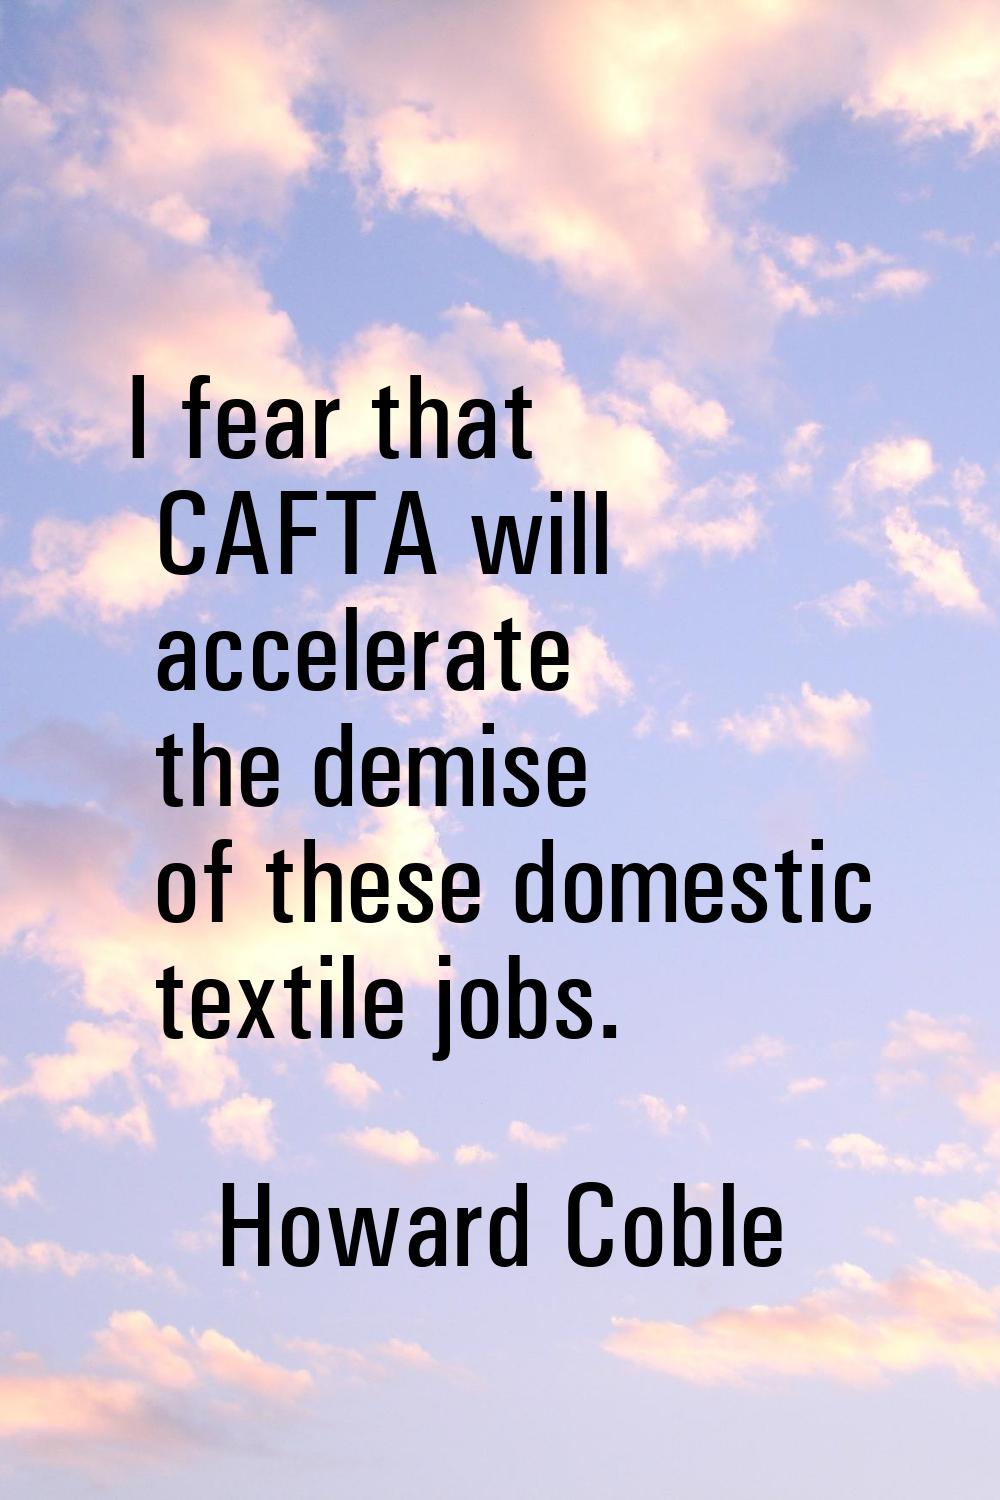 I fear that CAFTA will accelerate the demise of these domestic textile jobs.